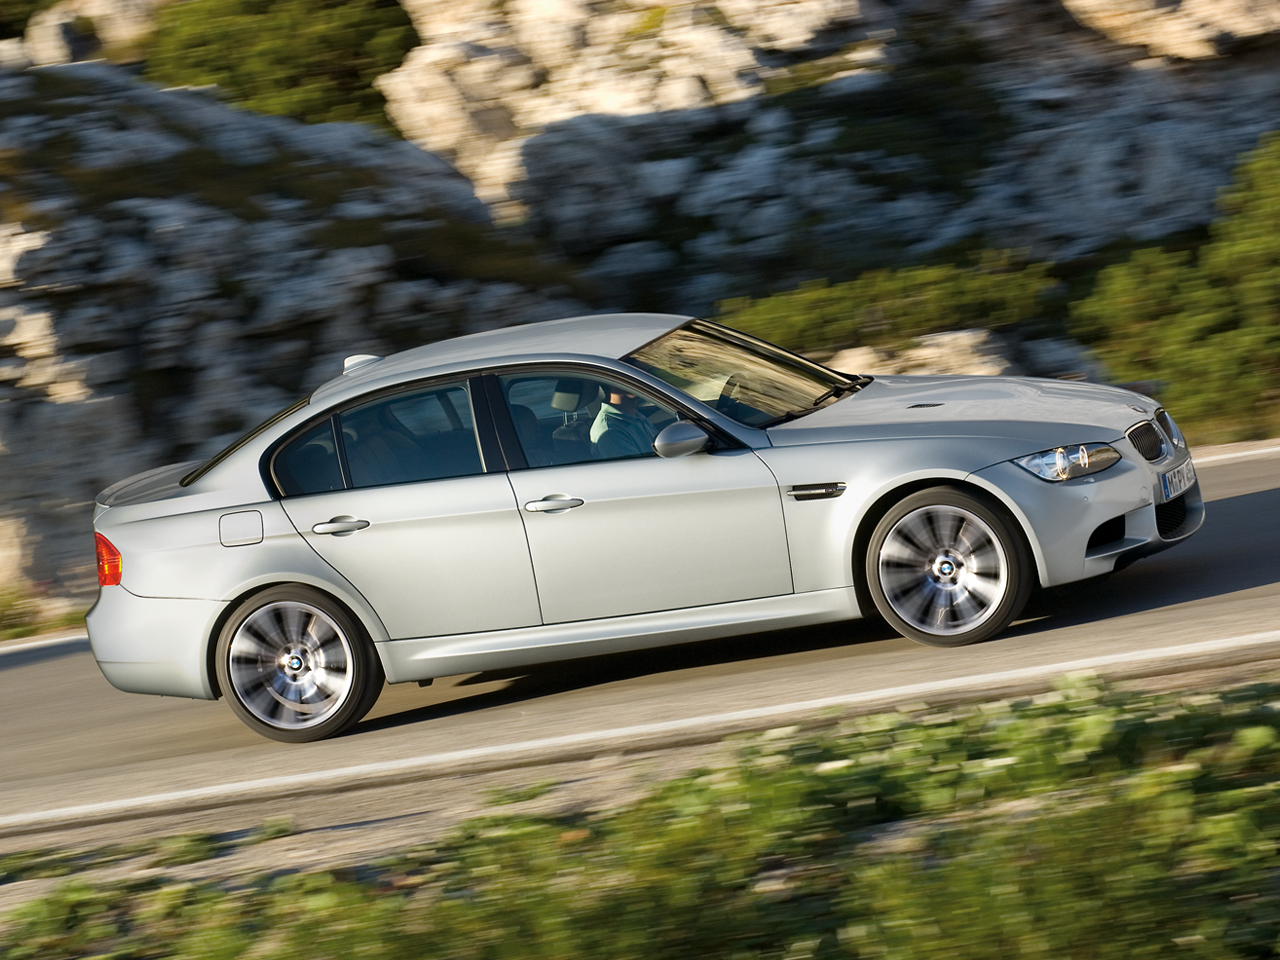 The BMW E92 M3 Buyer's Guide